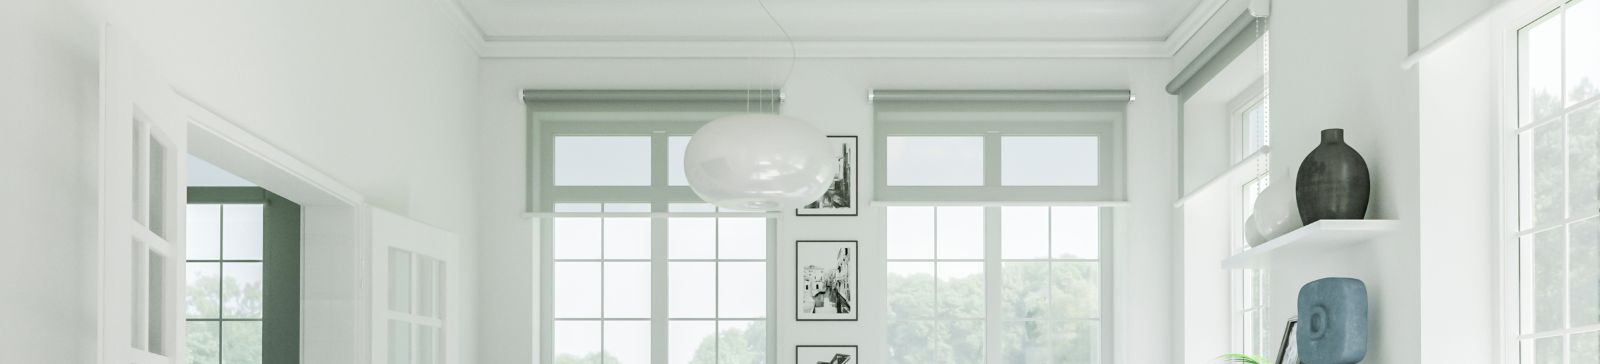 Blackout Roller Shades vs. Sheer Roller Shades: Which Is Right for You?